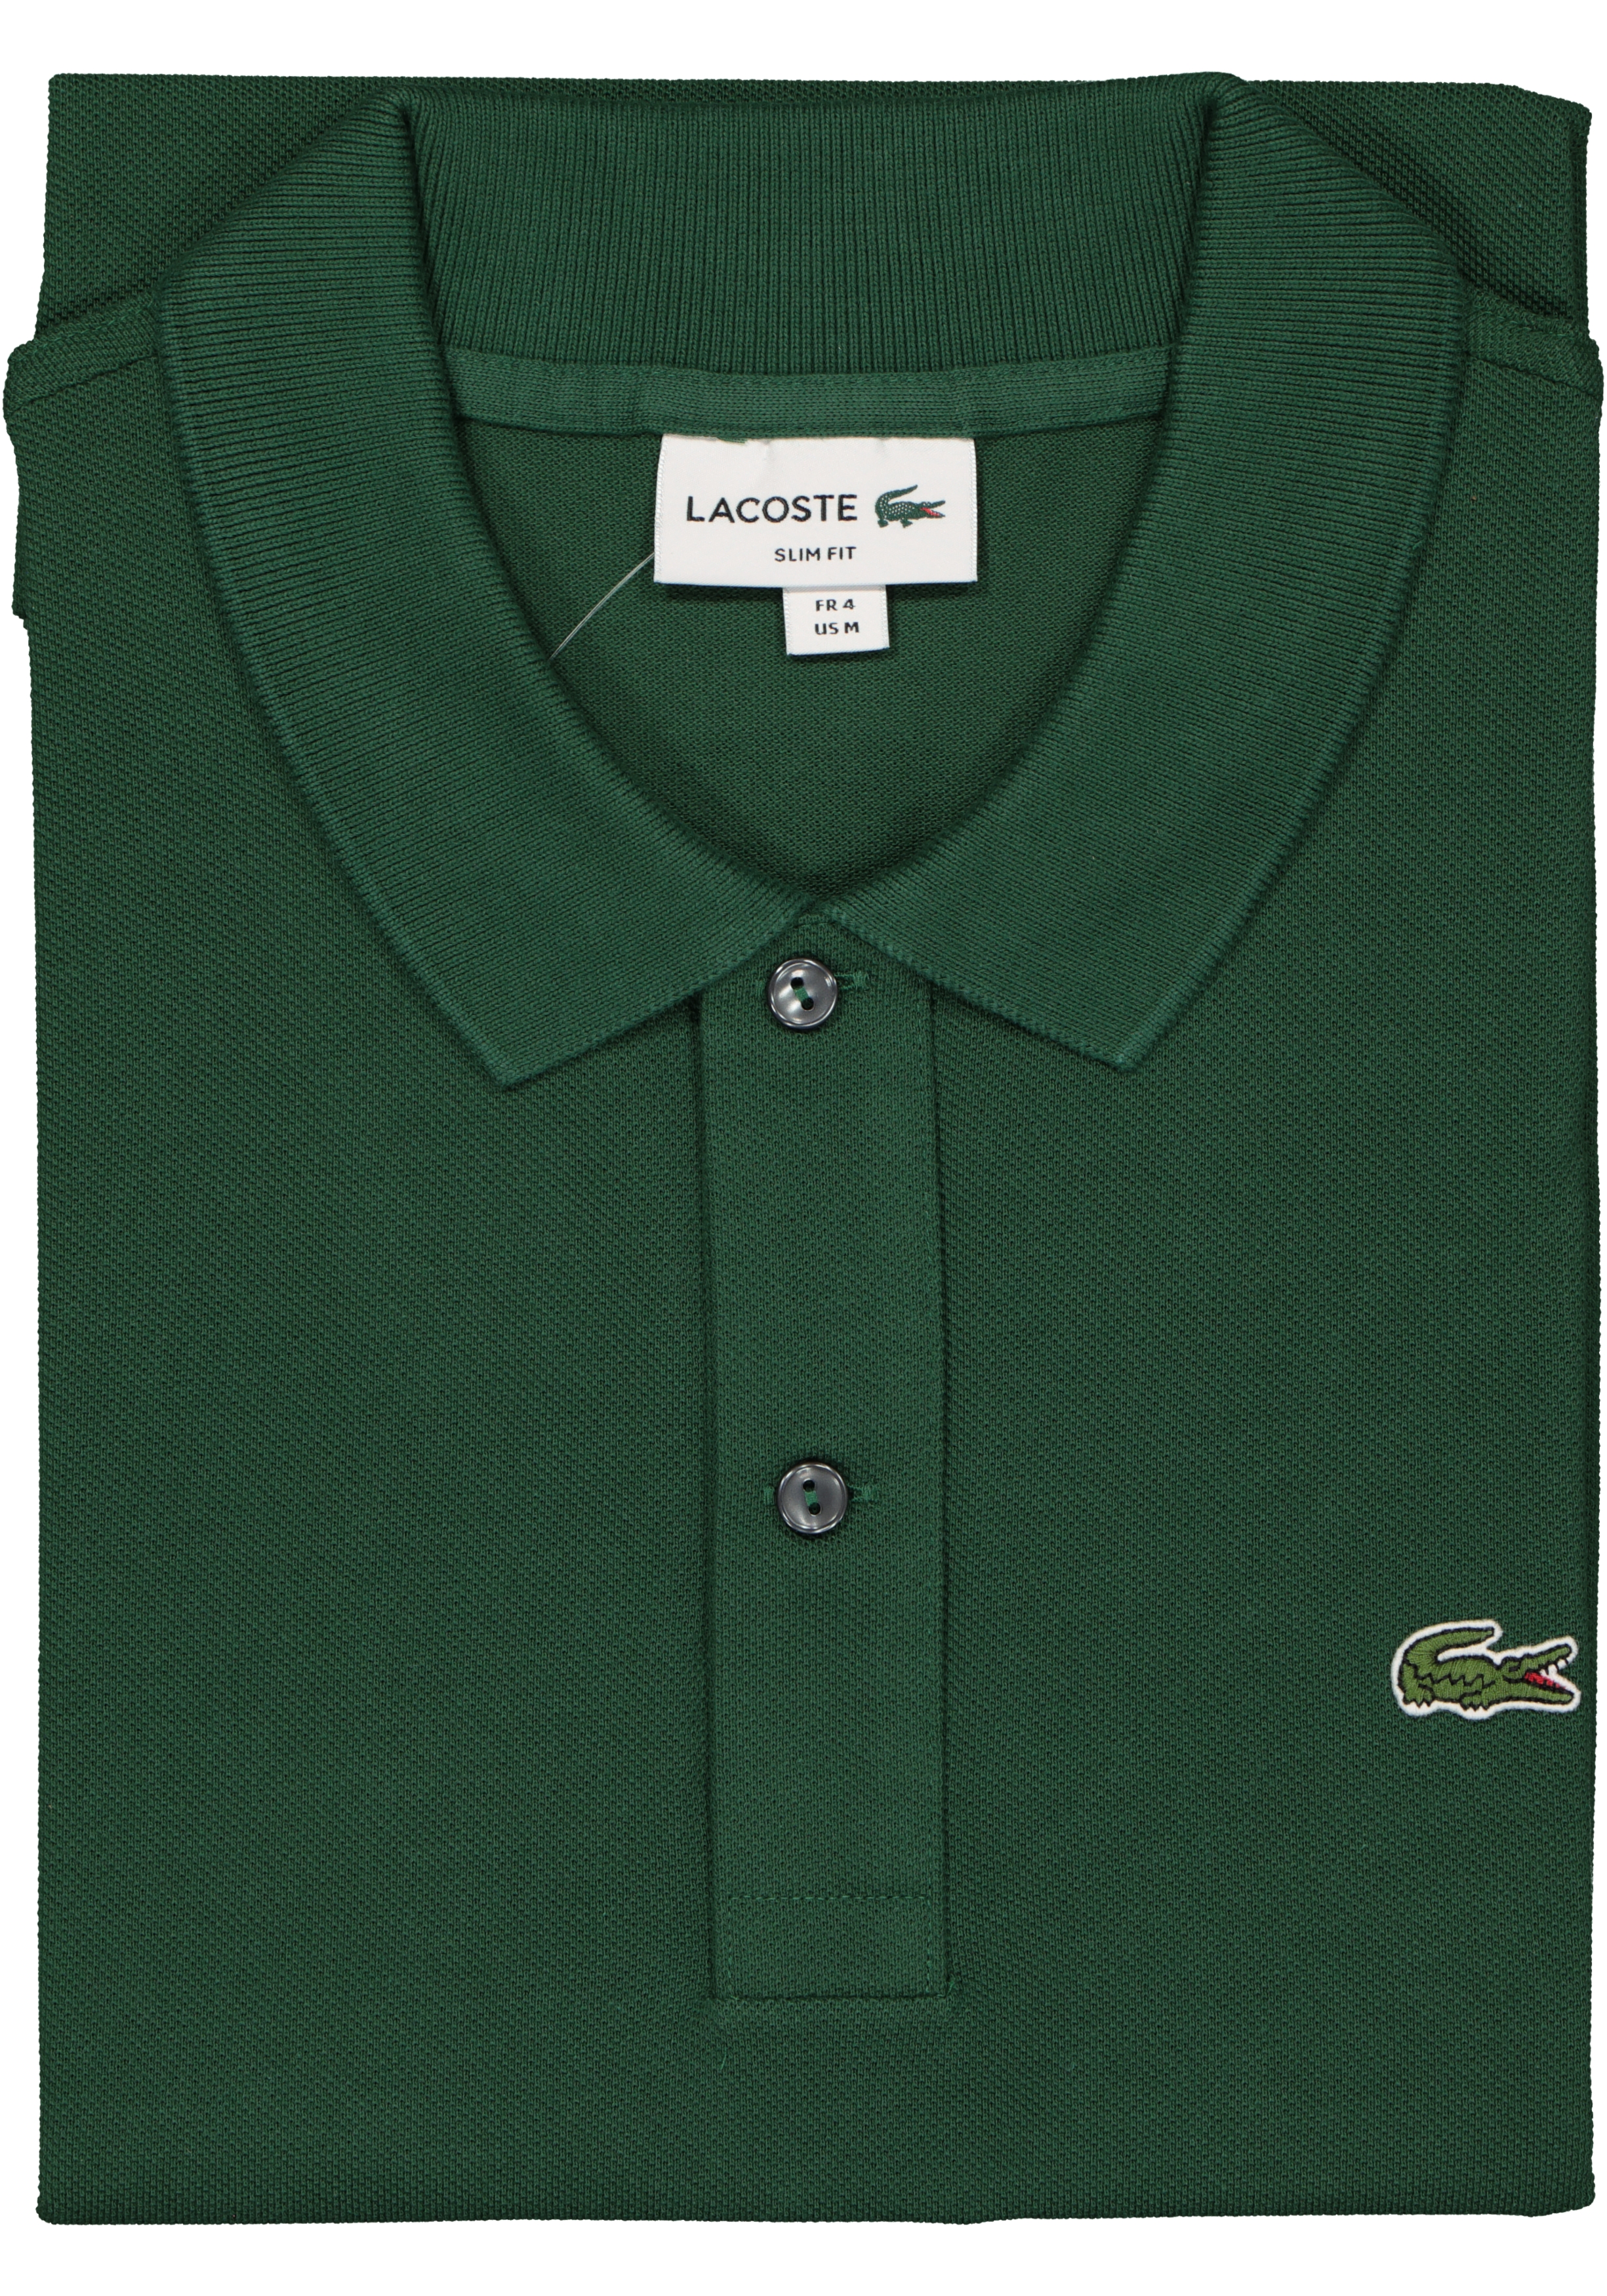 Mode Tops Polotops Lacoste Polotop groen casual uitstraling 